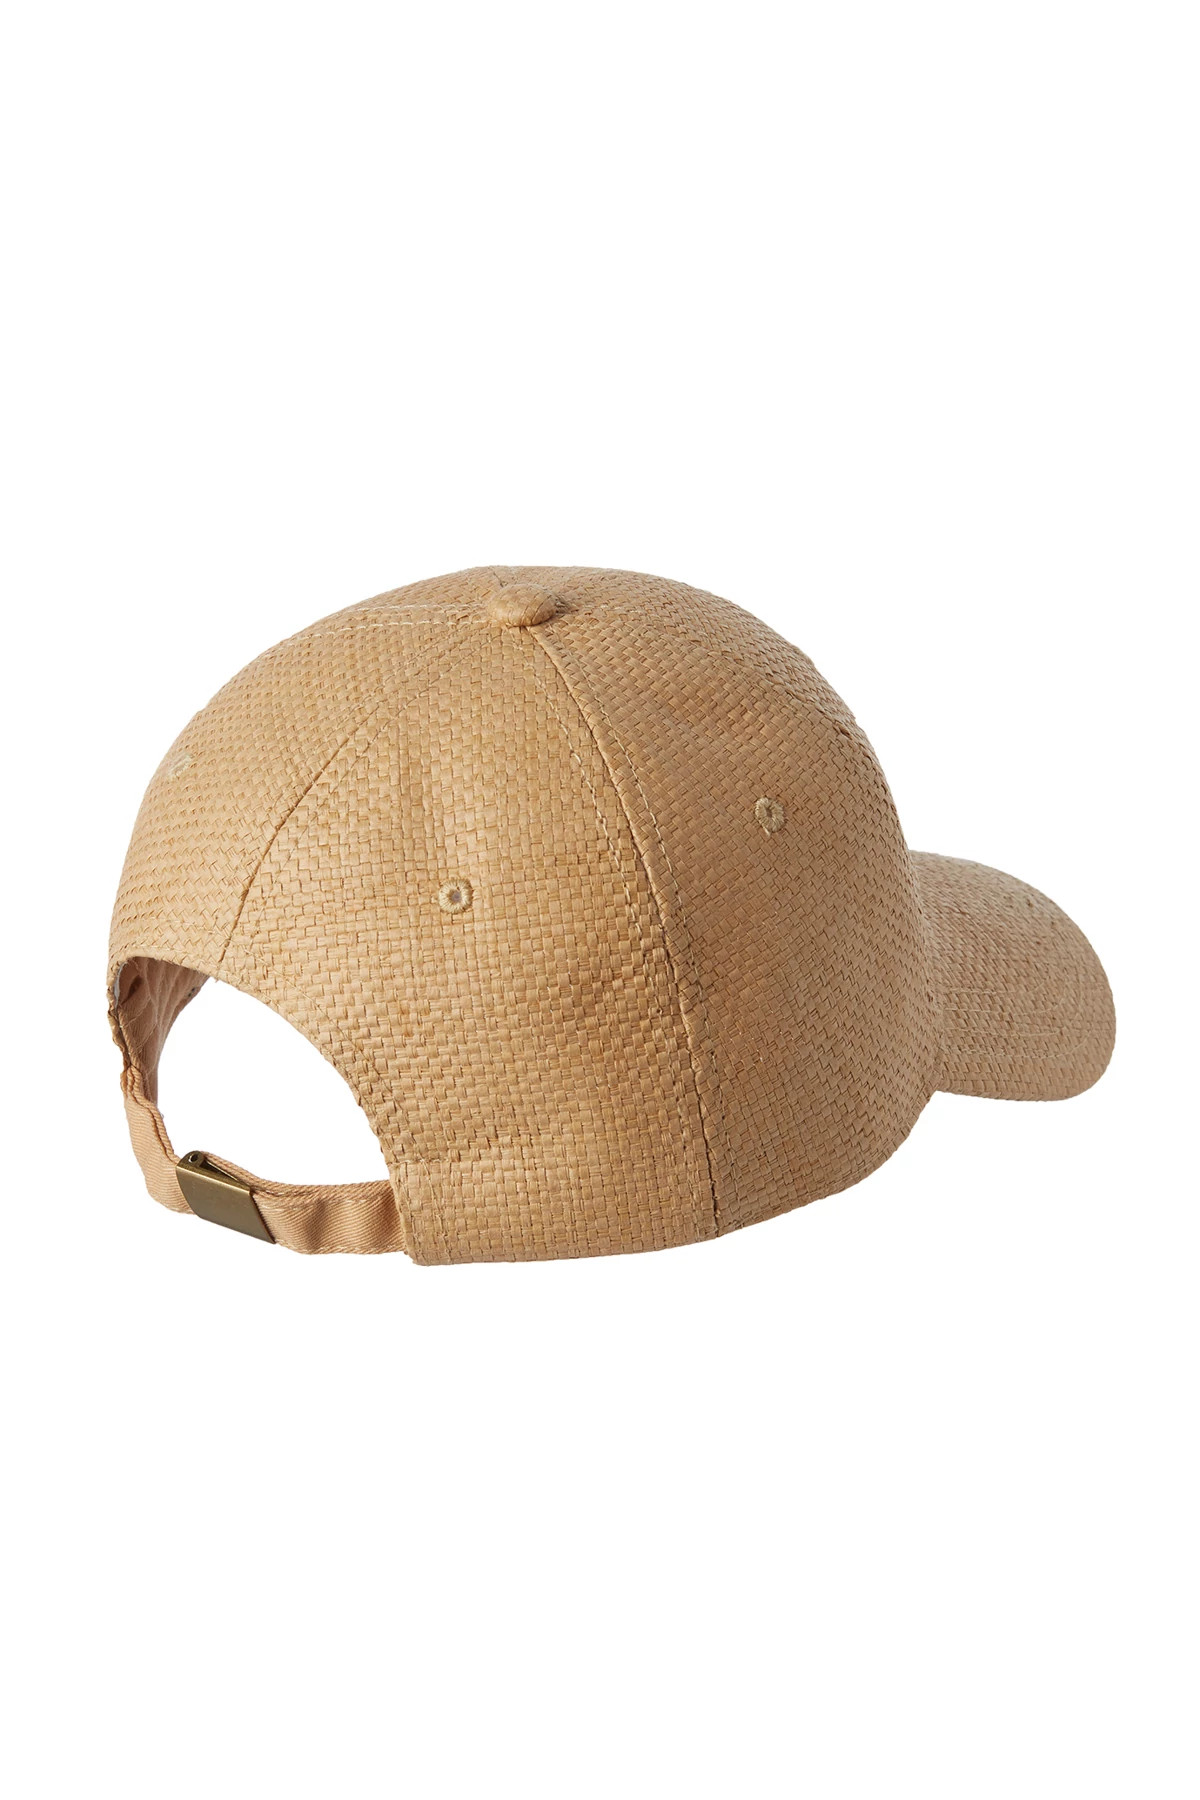 Woven Straw Baseball Cap image number 2